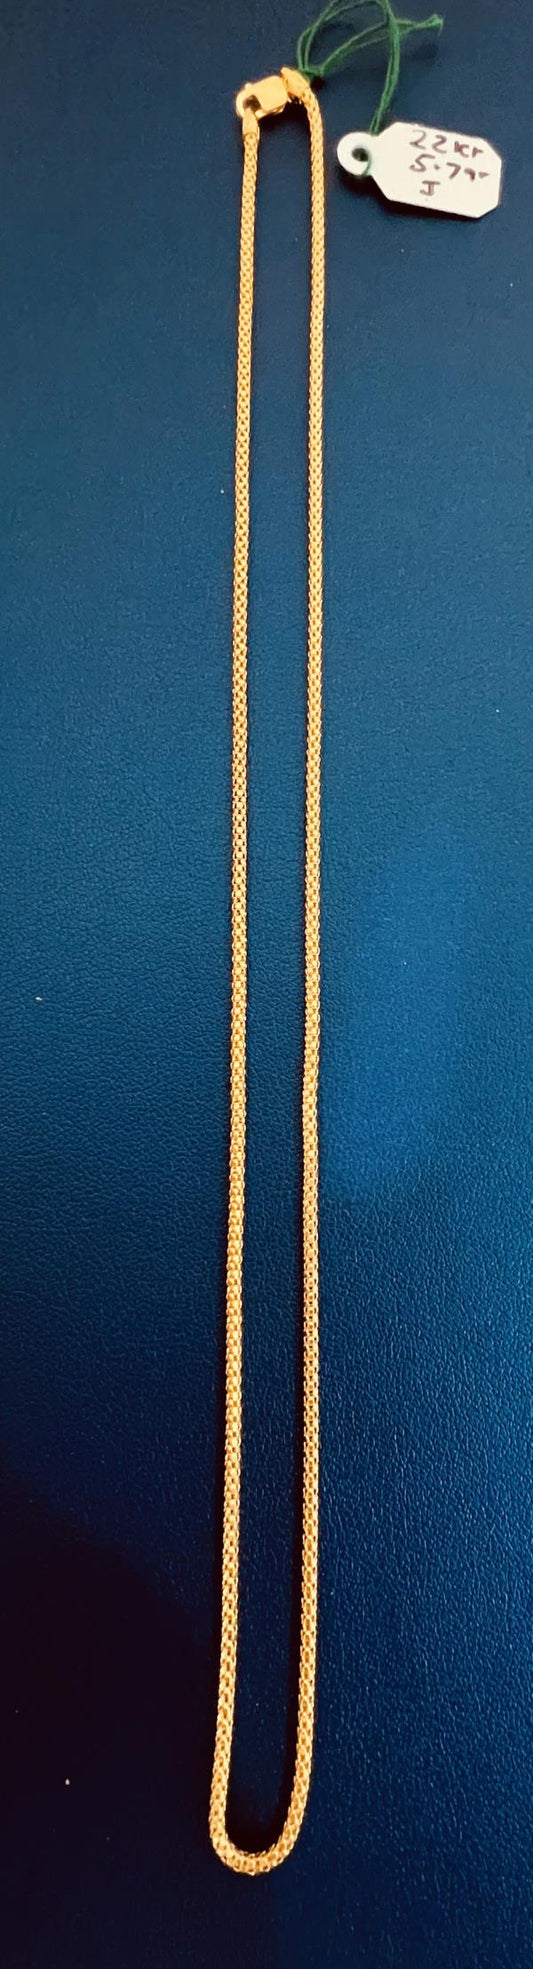 22KT GOLD CHAIN 17" 5.7GM